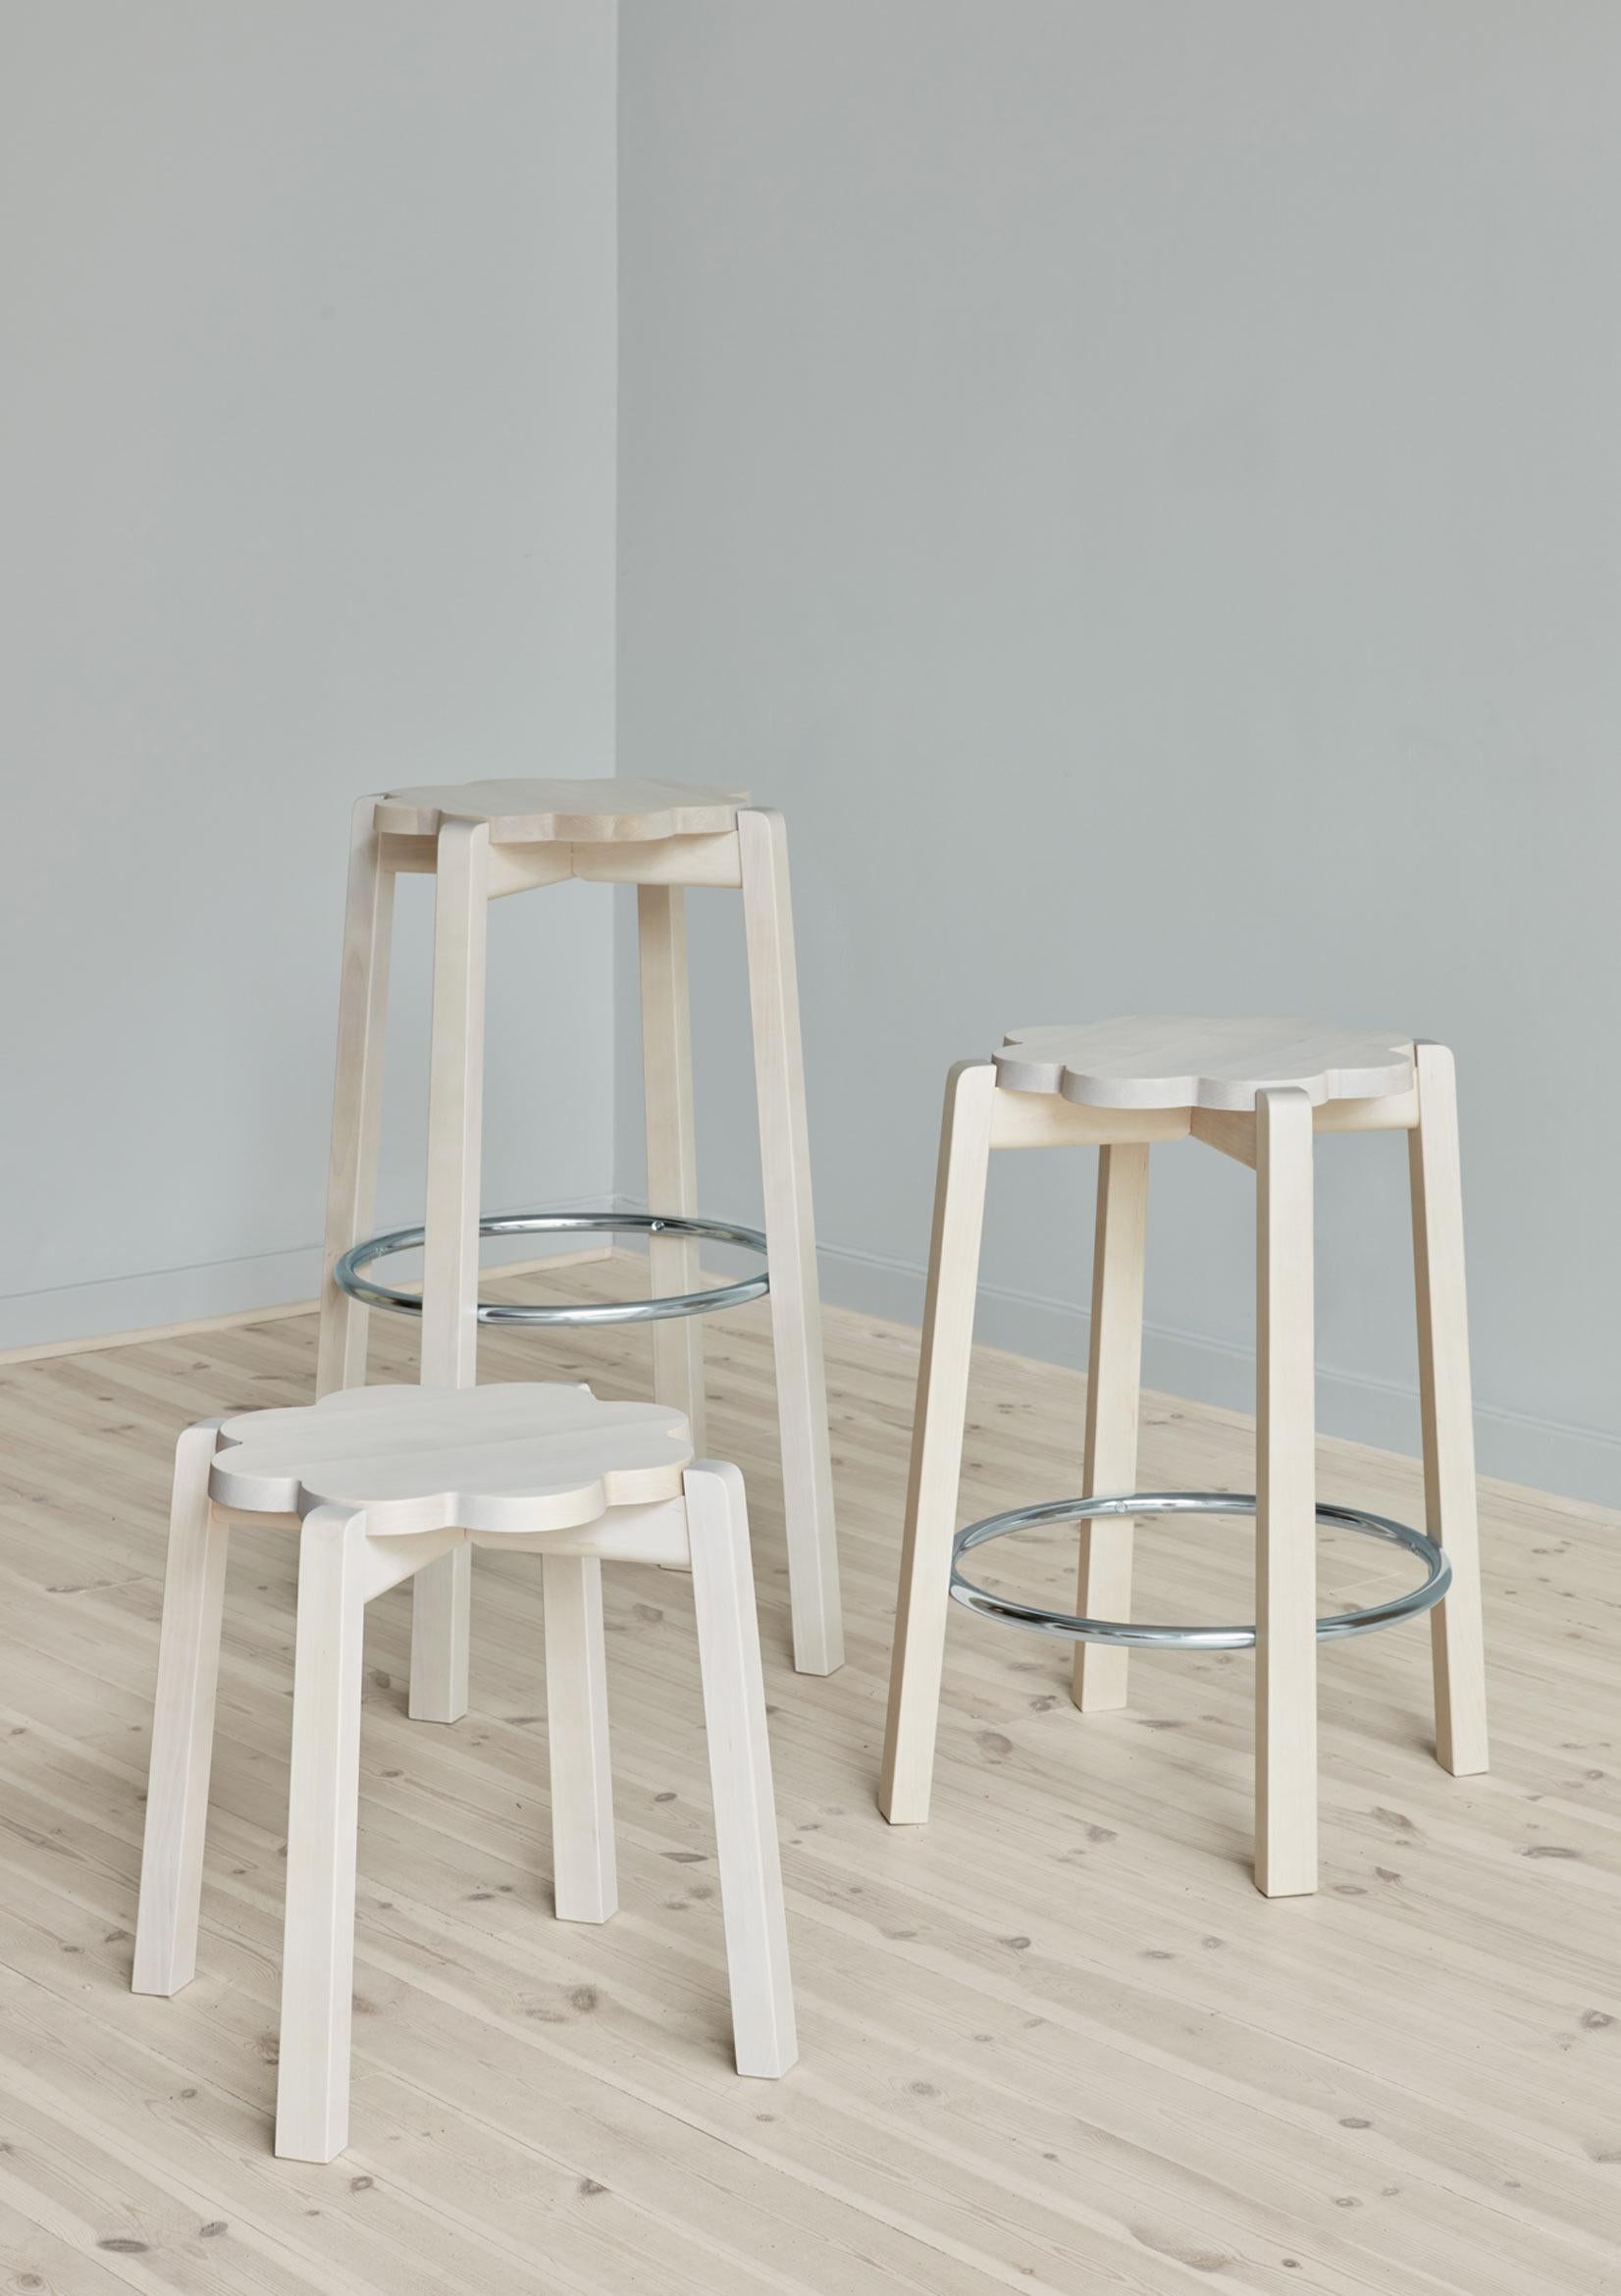 Natural Blossom stool by Storängen Design
Dimensions: D 41 x W 41 x H 45 cm
Materials: birch wood.
Available in other colors and sizes.

A small and neat stackable chair, which works well round tables in cafes and living rooms.
A clean